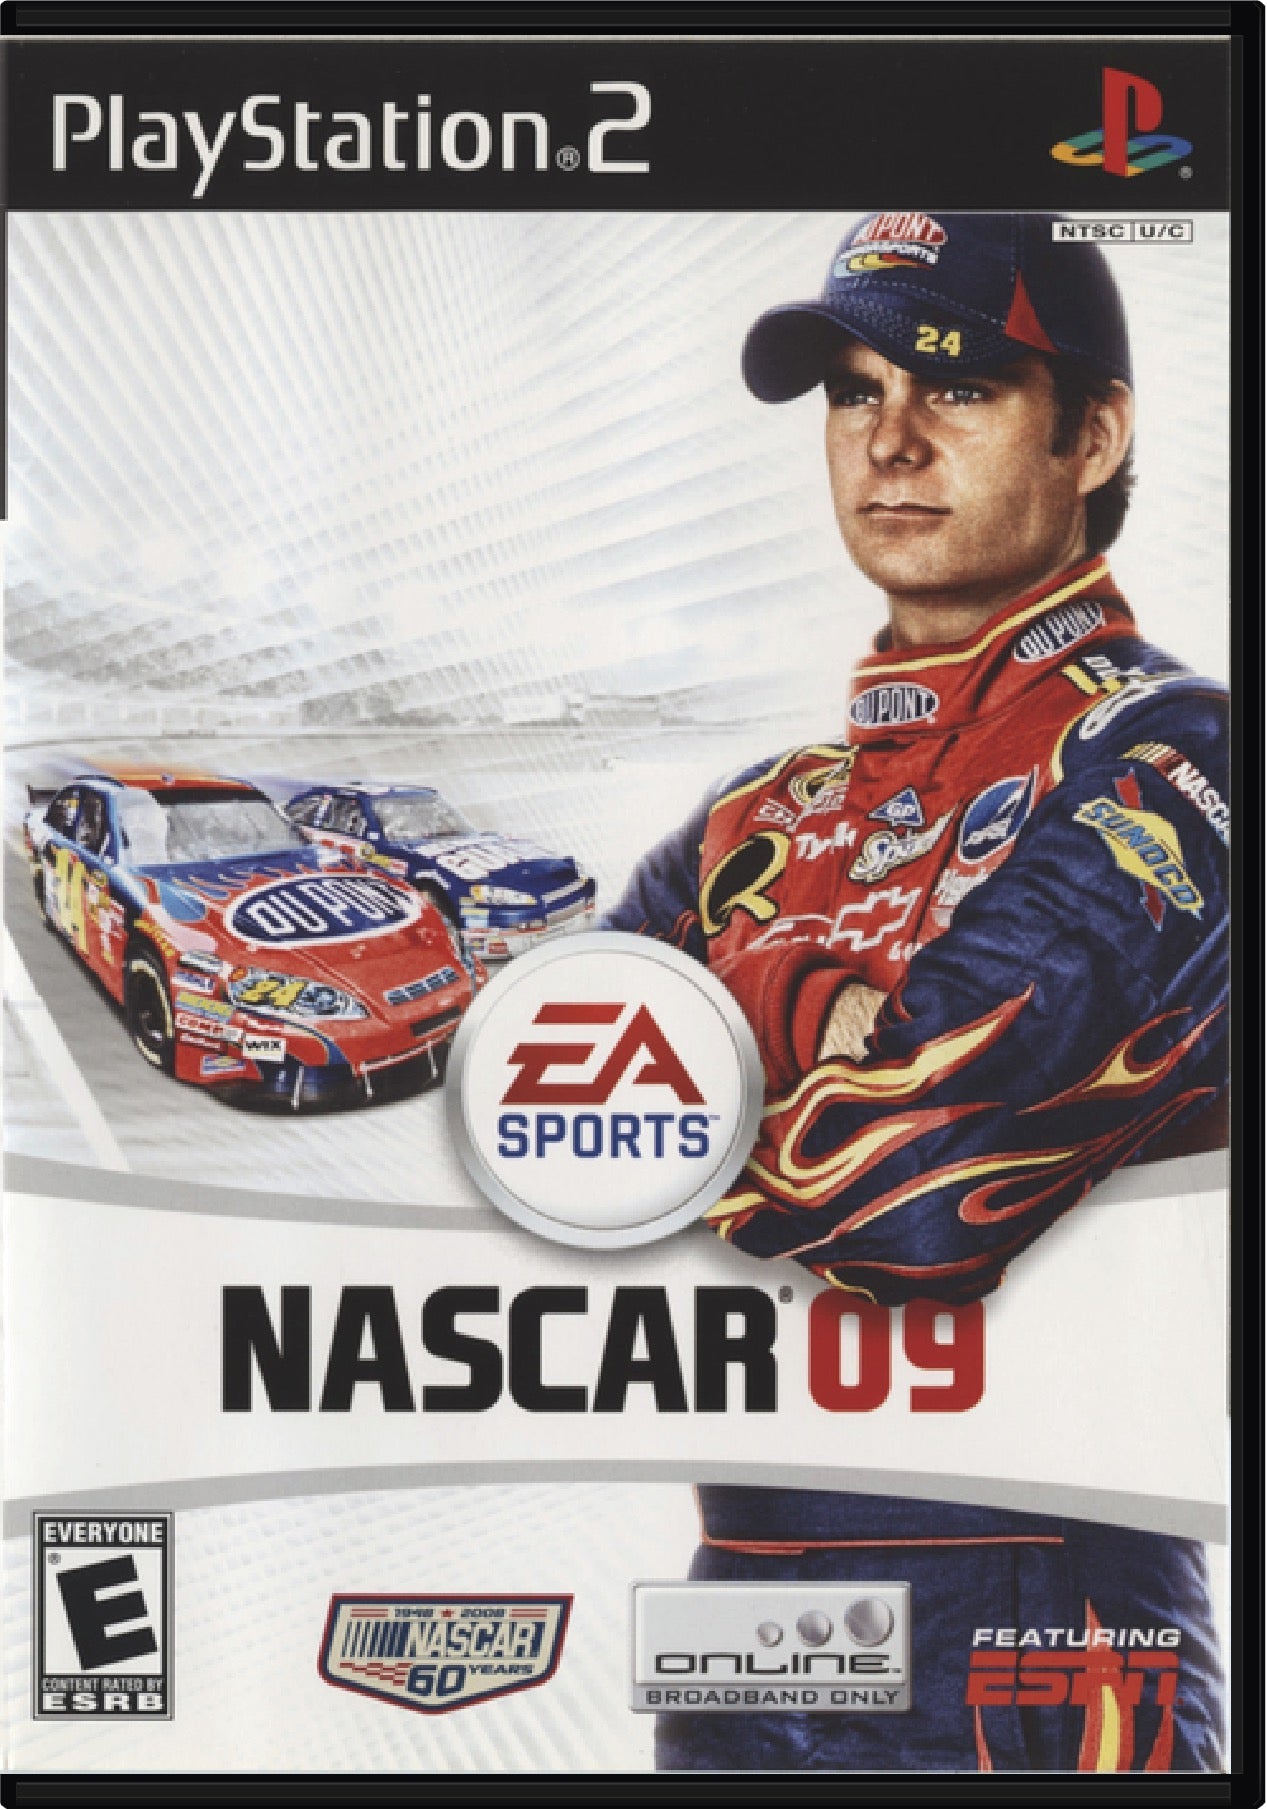 NASCAR 09 Cover Art and Product Photo